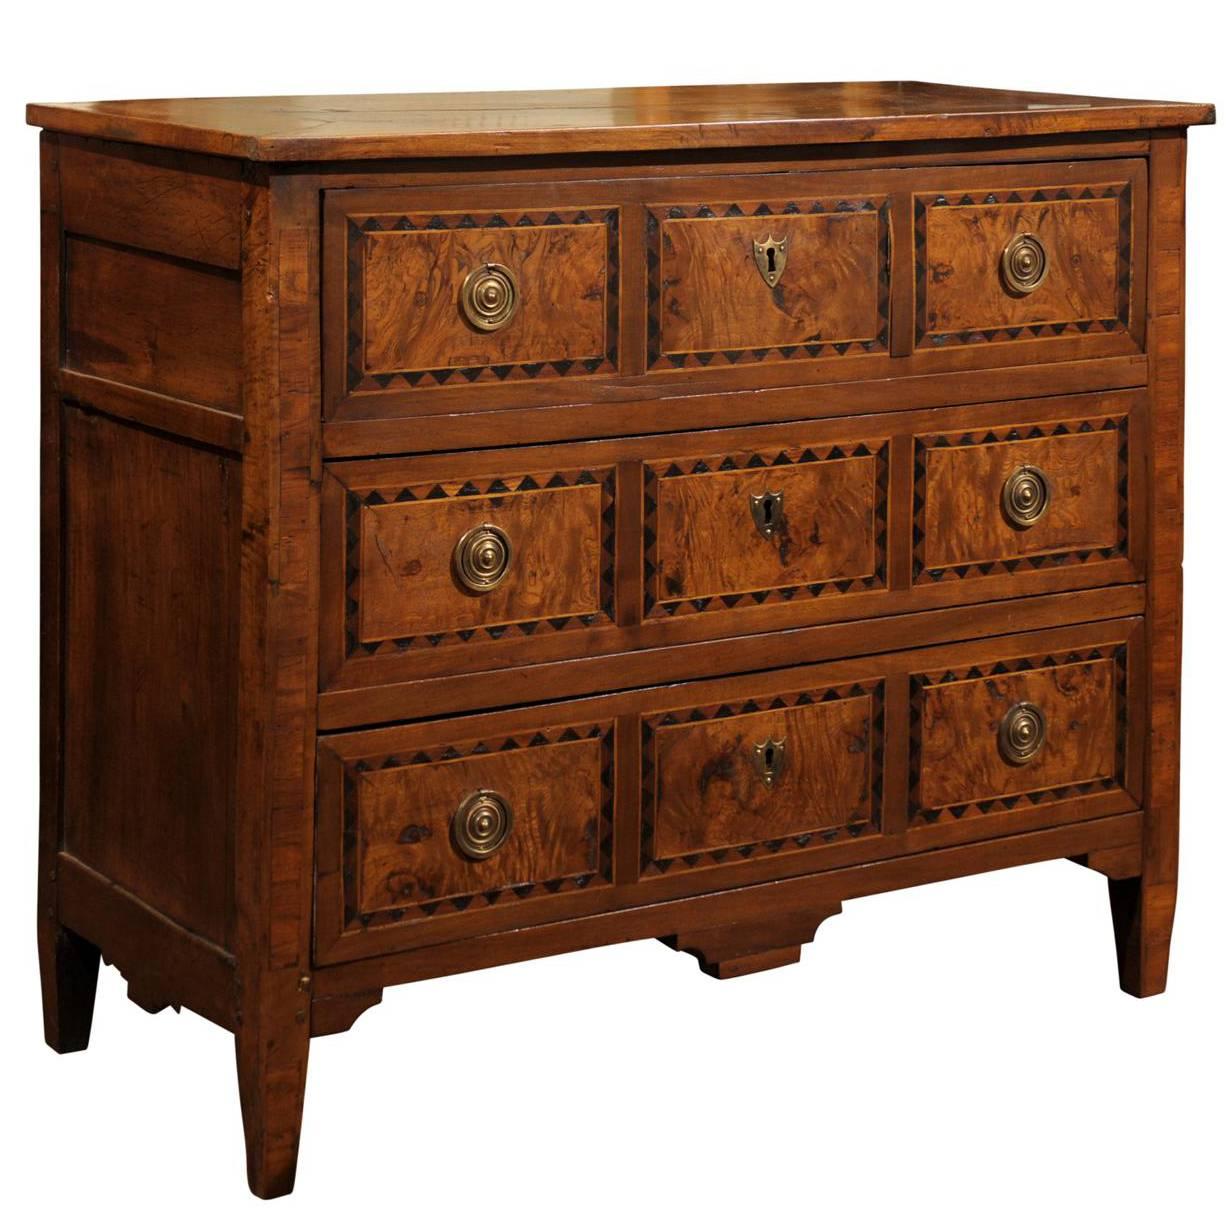 Mid to Late 19th Century Burl Walnut Commode